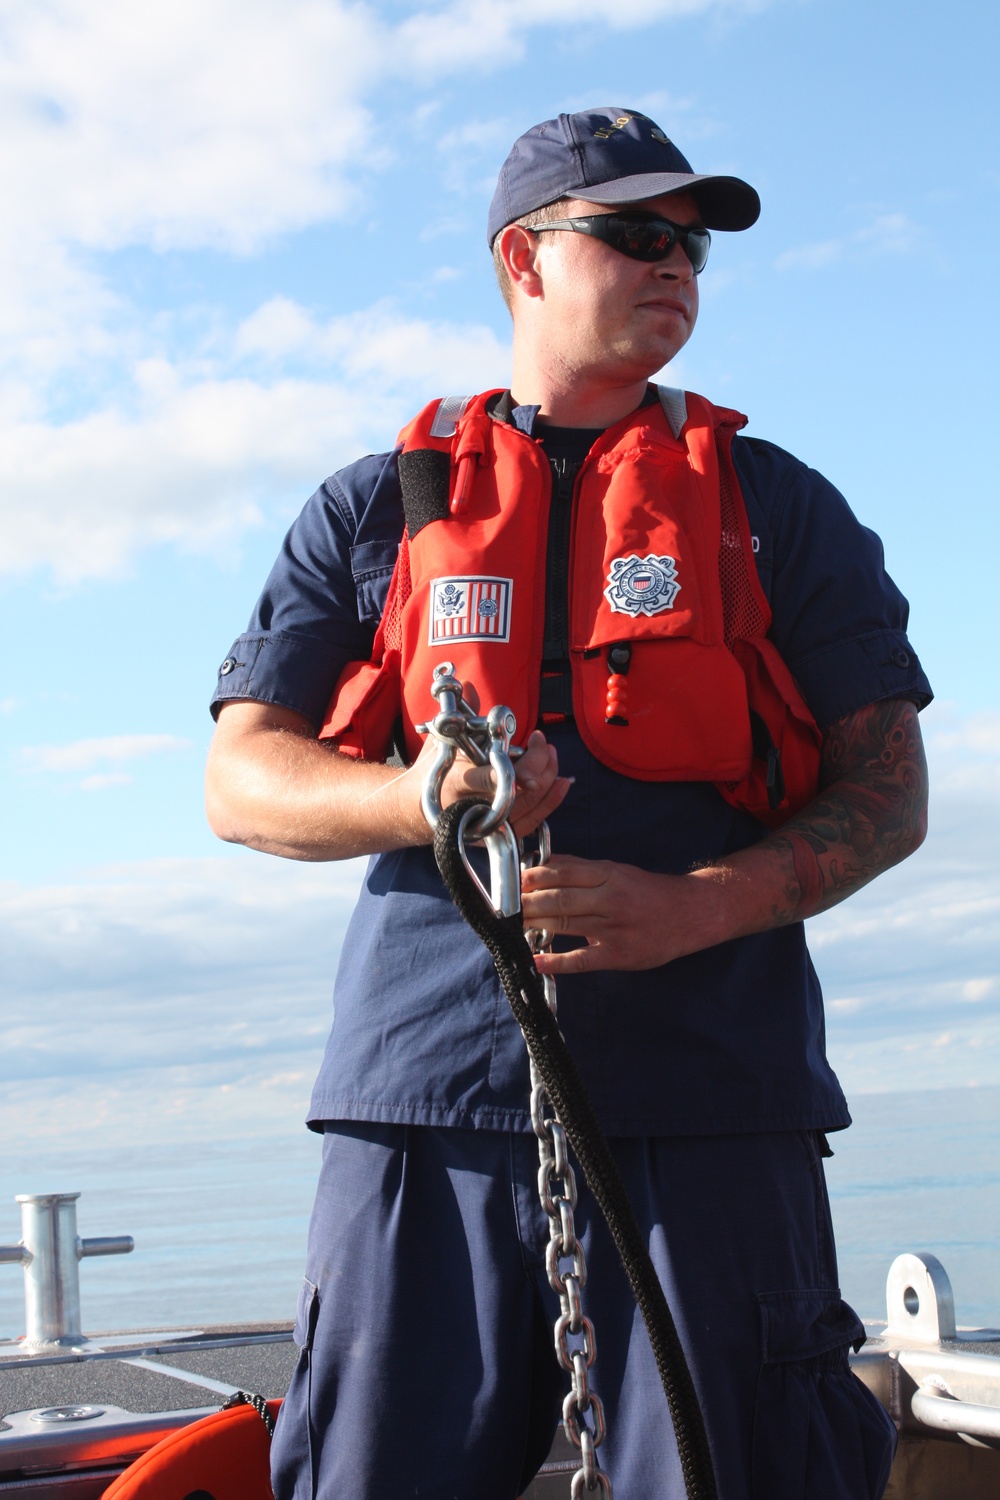 Week in the life of the Coast Guard 2014